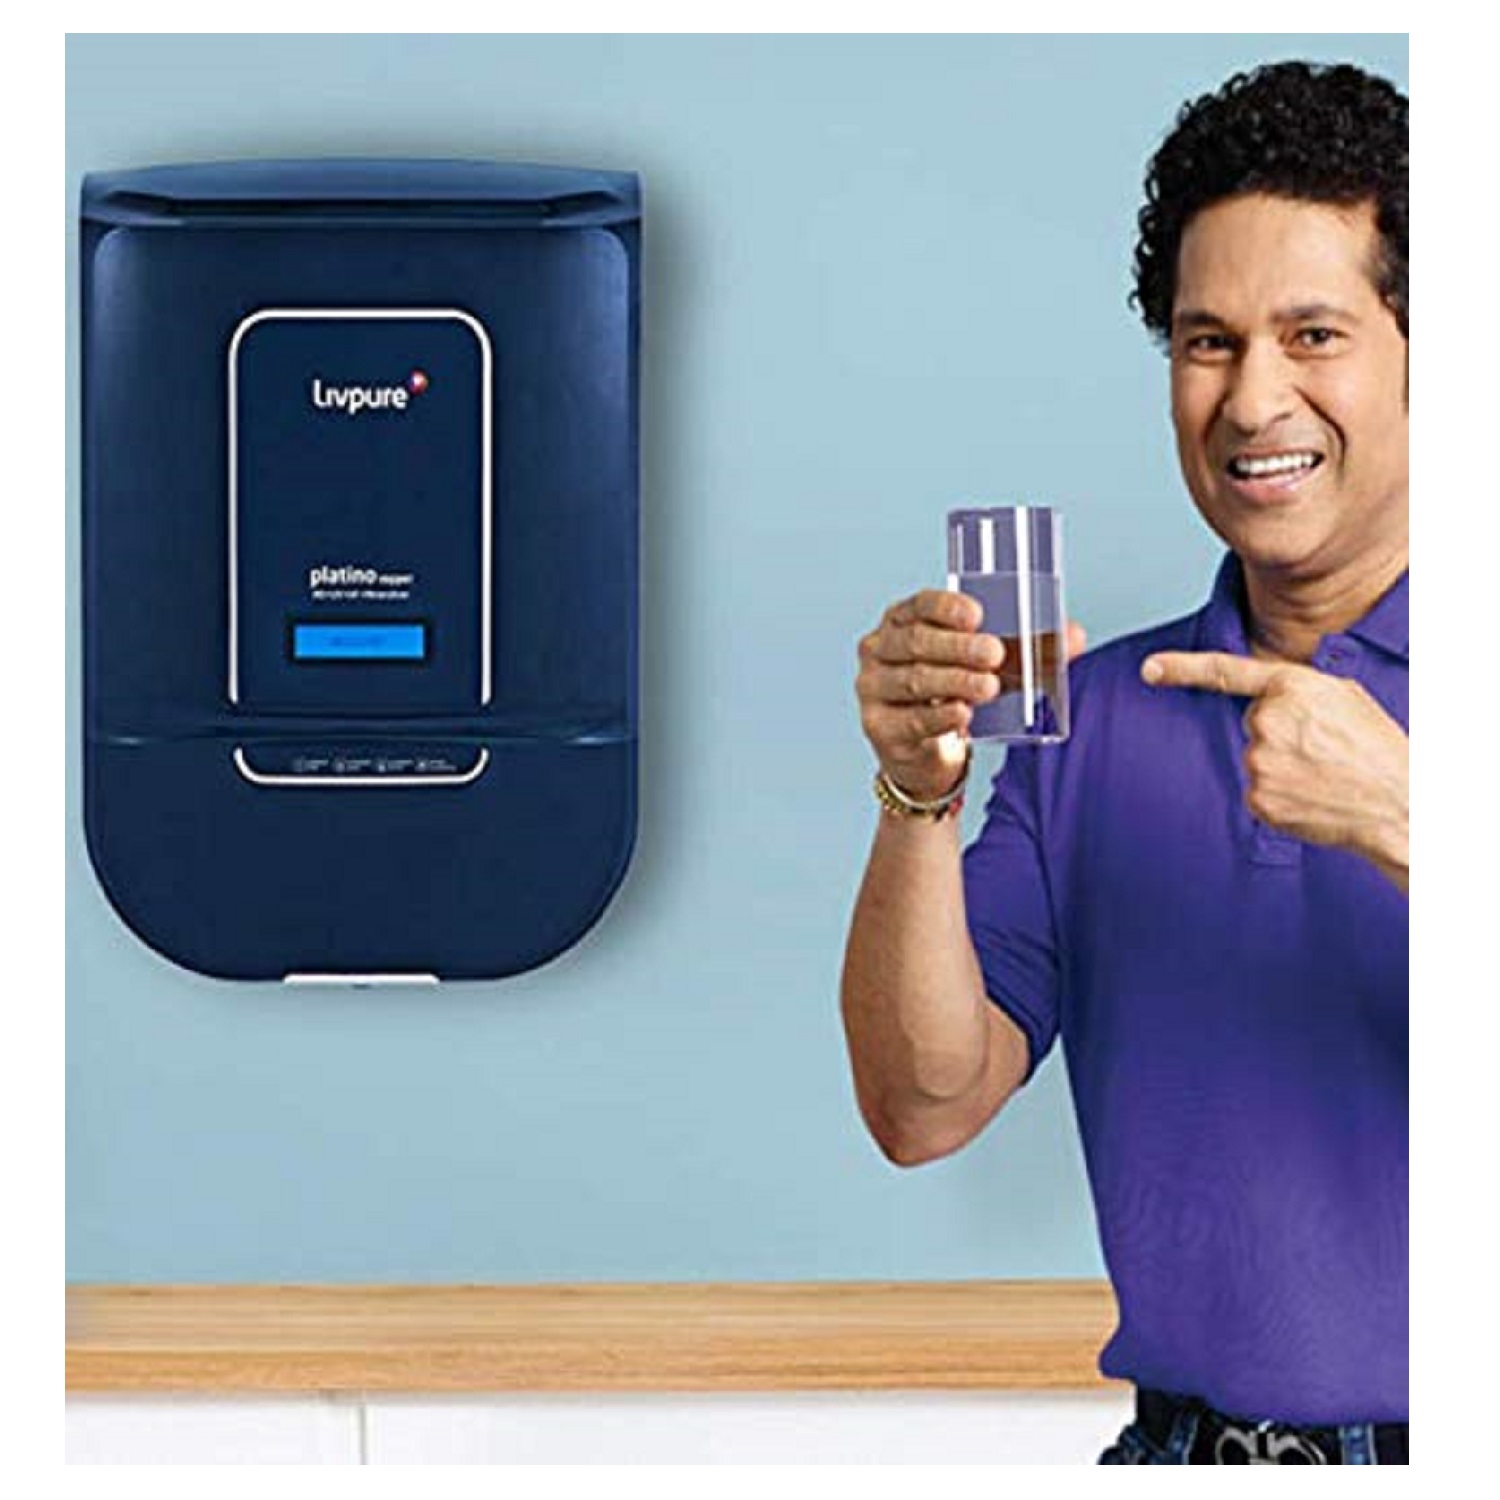 Livpure Platino RO+UF+TDS+TE tank with built-in UV and 29 active copper water purifiers.